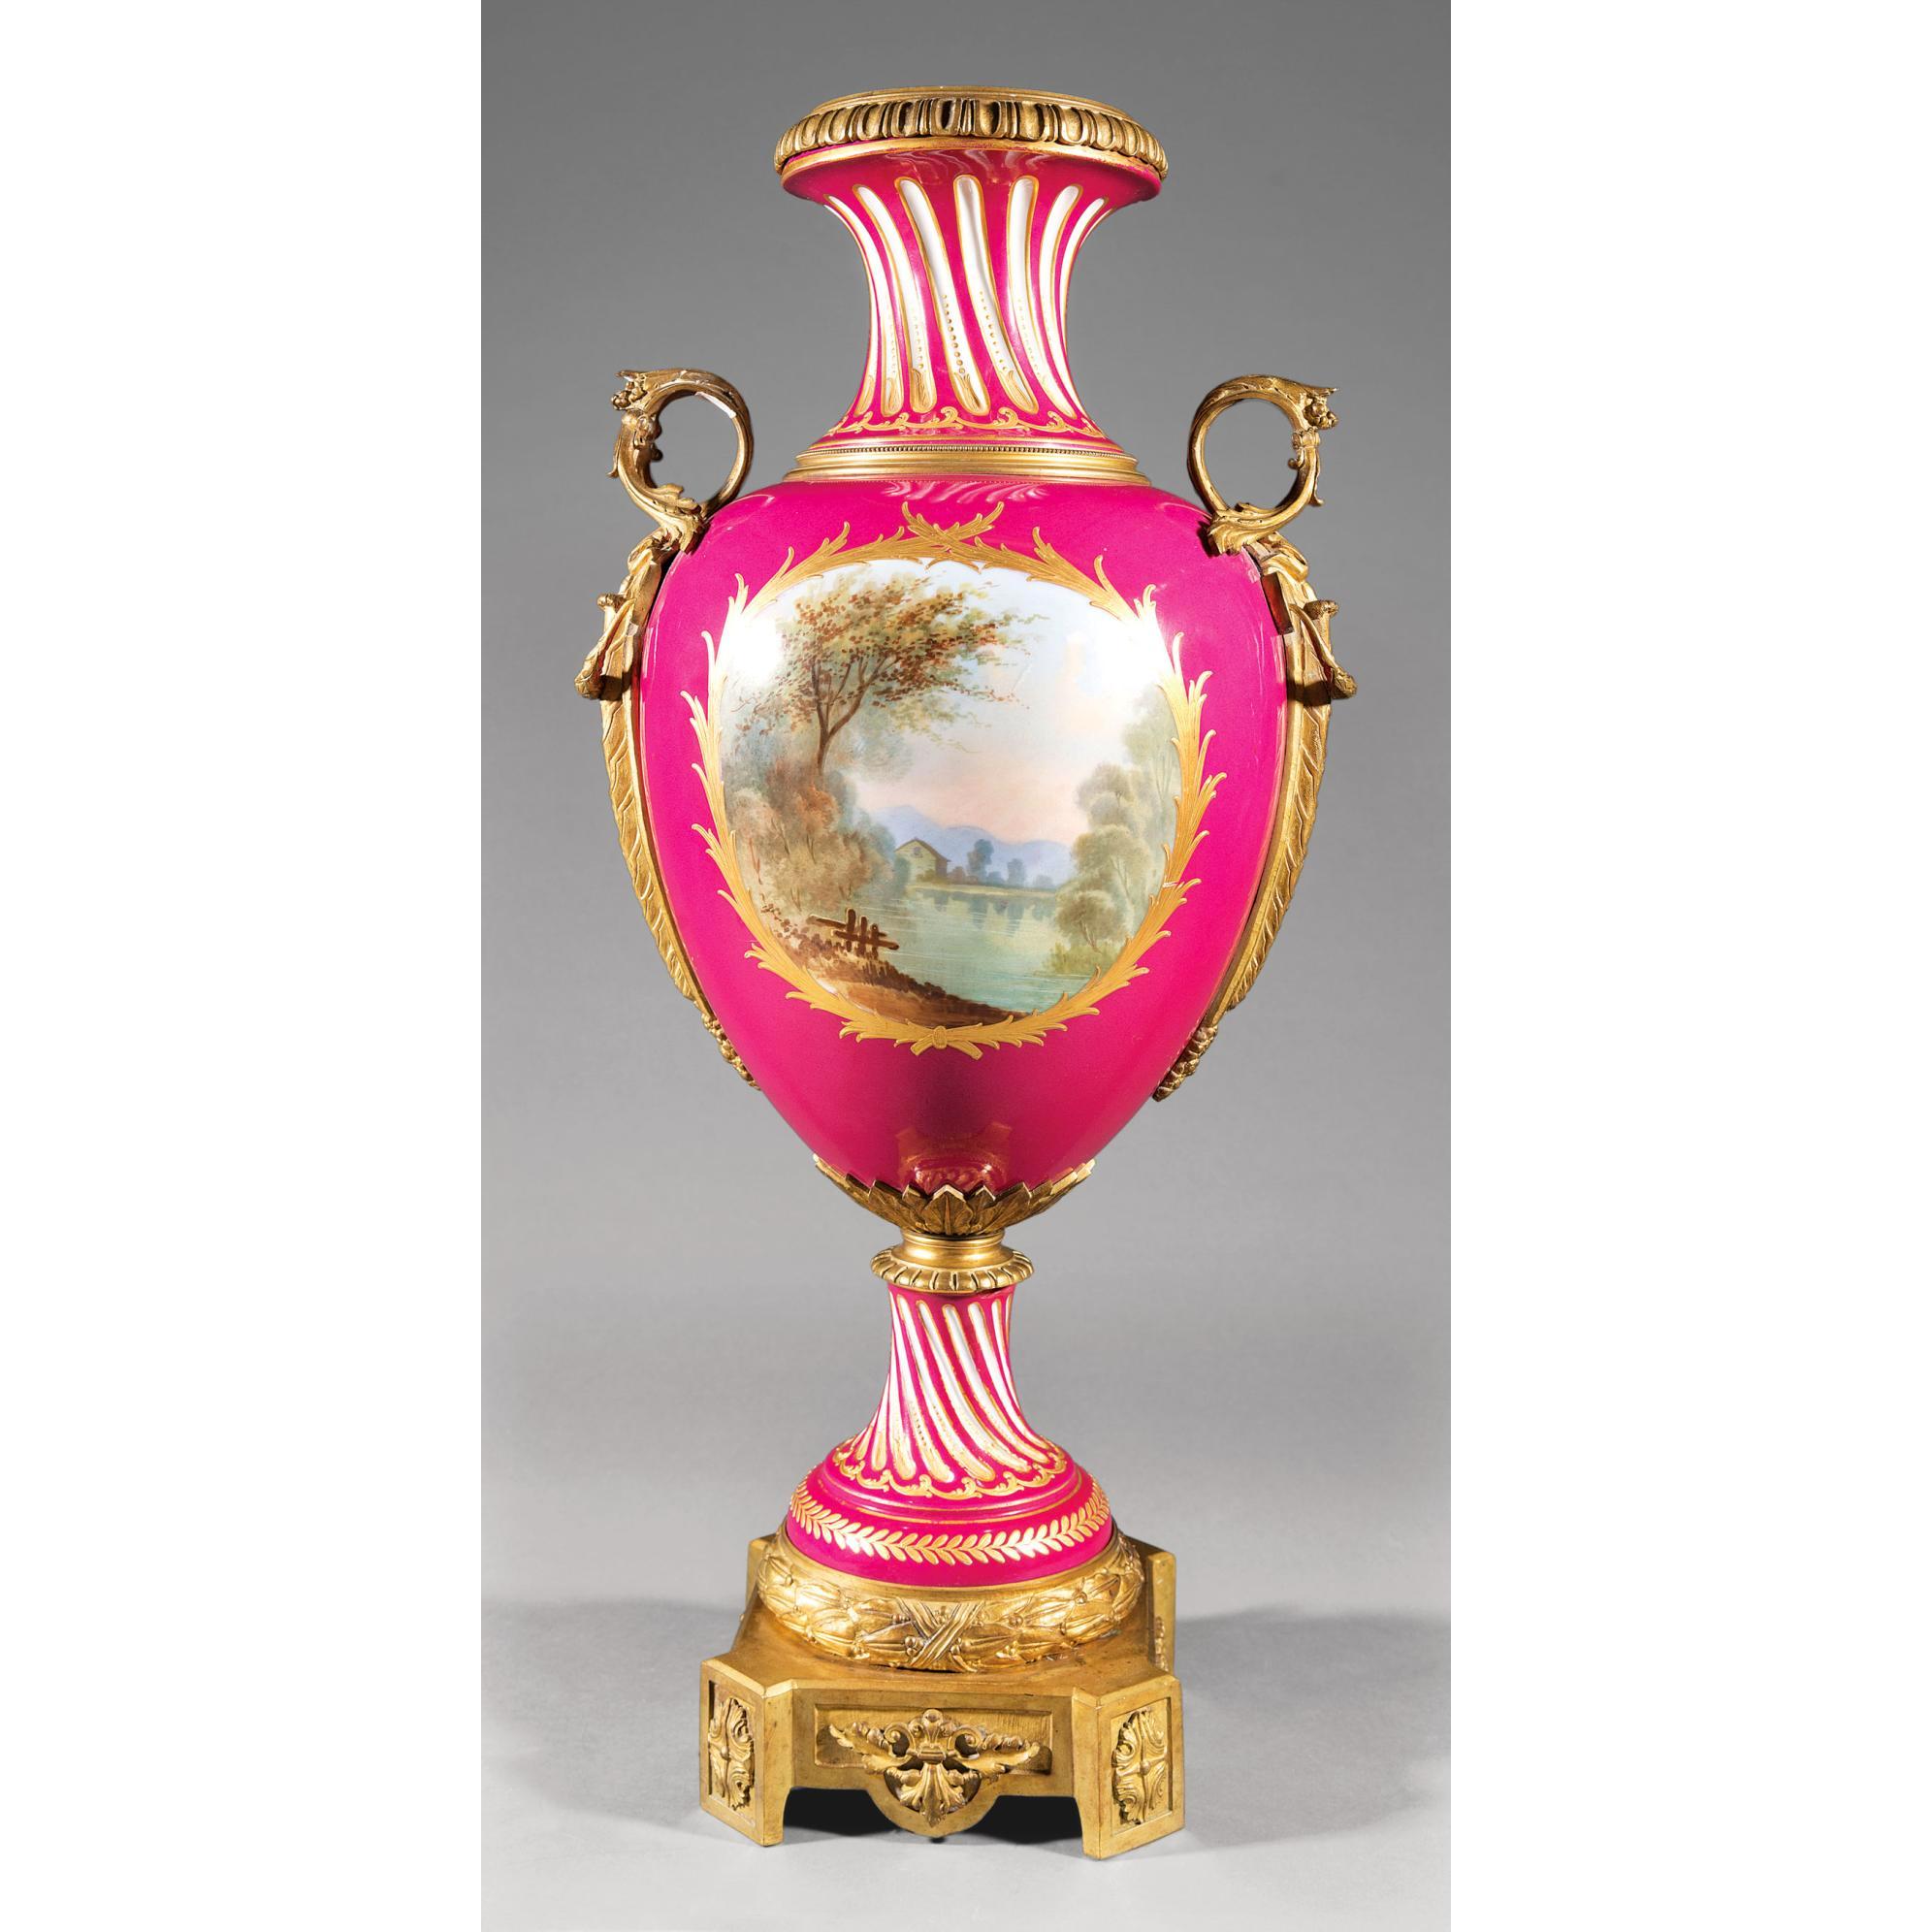 An Elegant gilt bronze-mounted Sèvres-style fuchsia ground porcelain urn with classical painting. Decorated with Classical figures and an idyllic landscape within raised gilt cartouches on a fuchsia ground; bronze beaded and foliate rims, foliate